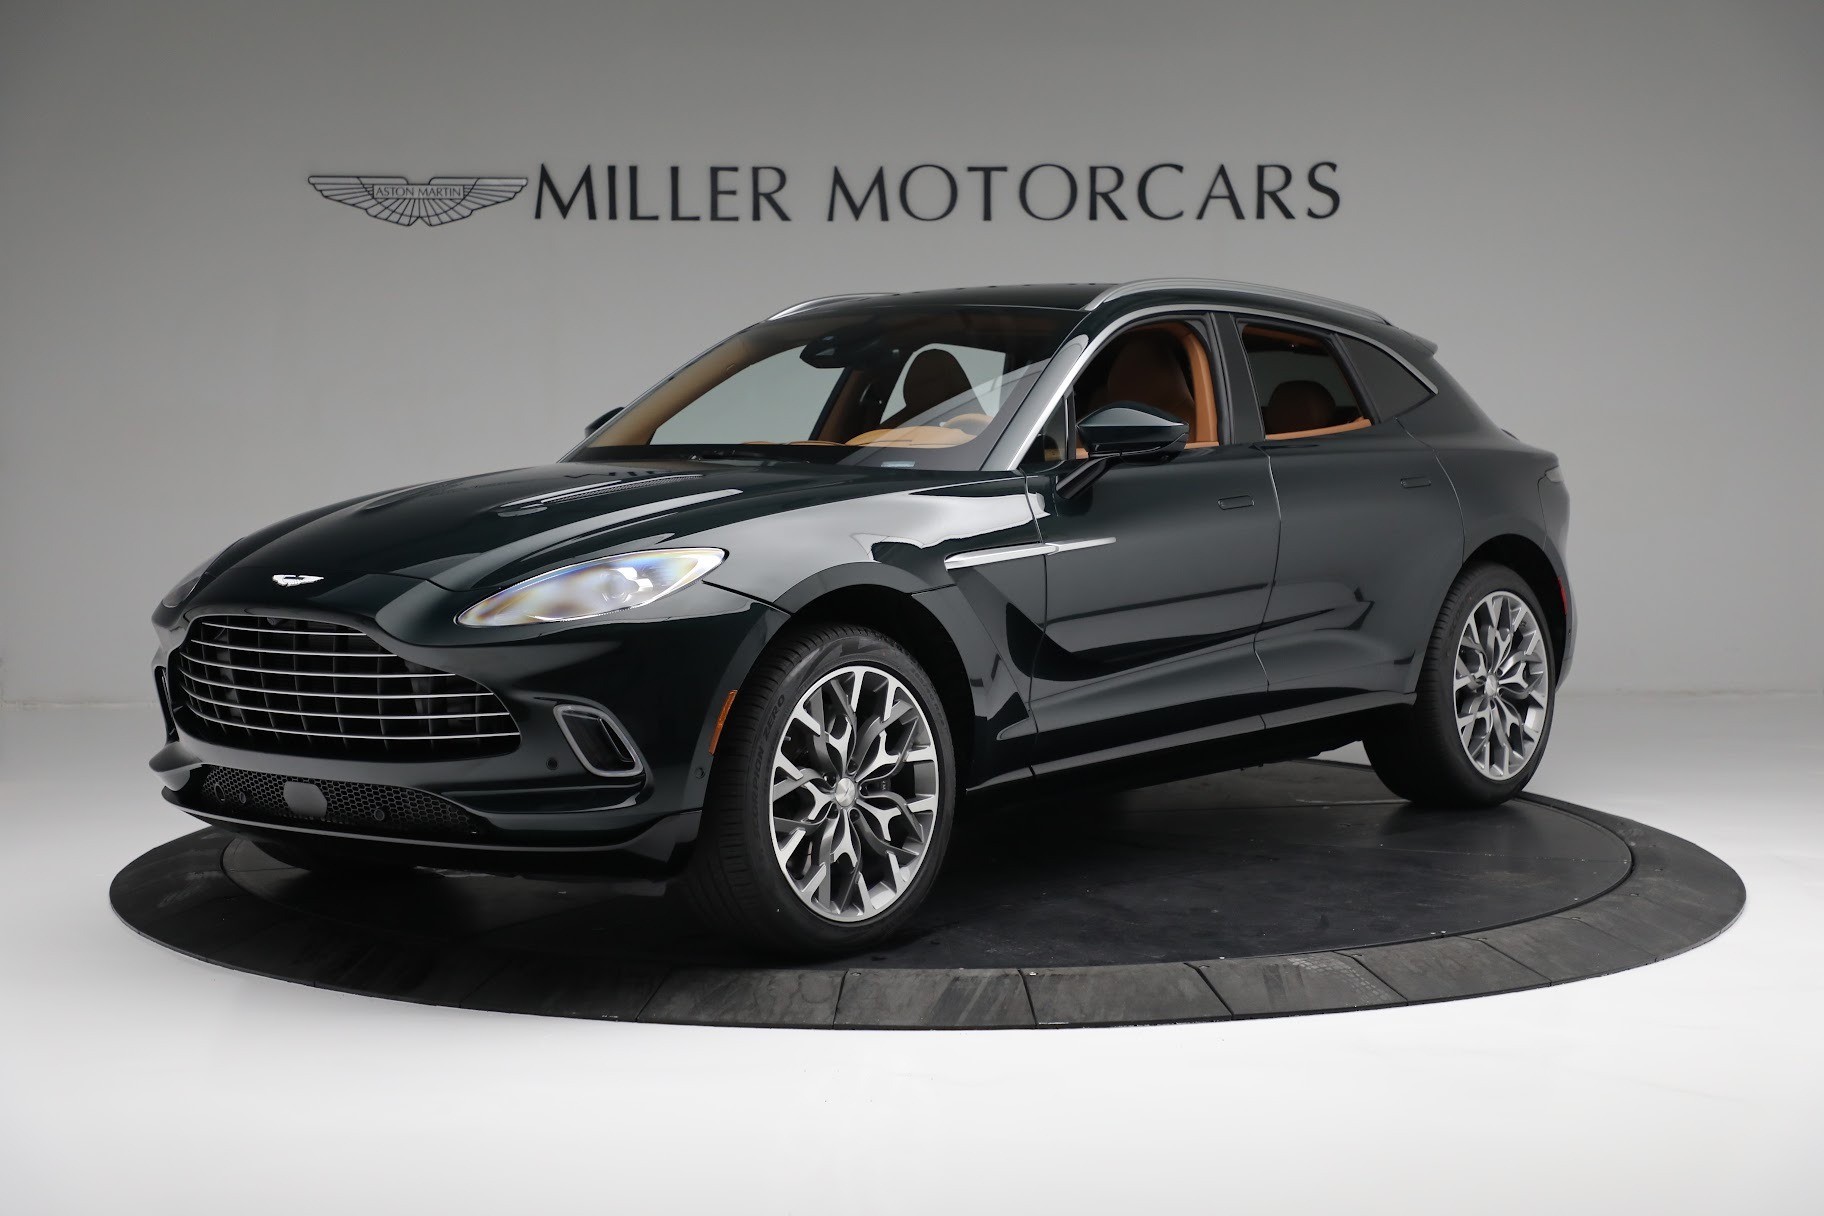 New 2021 Aston Martin DBX for sale Sold at Rolls-Royce Motor Cars Greenwich in Greenwich CT 06830 1